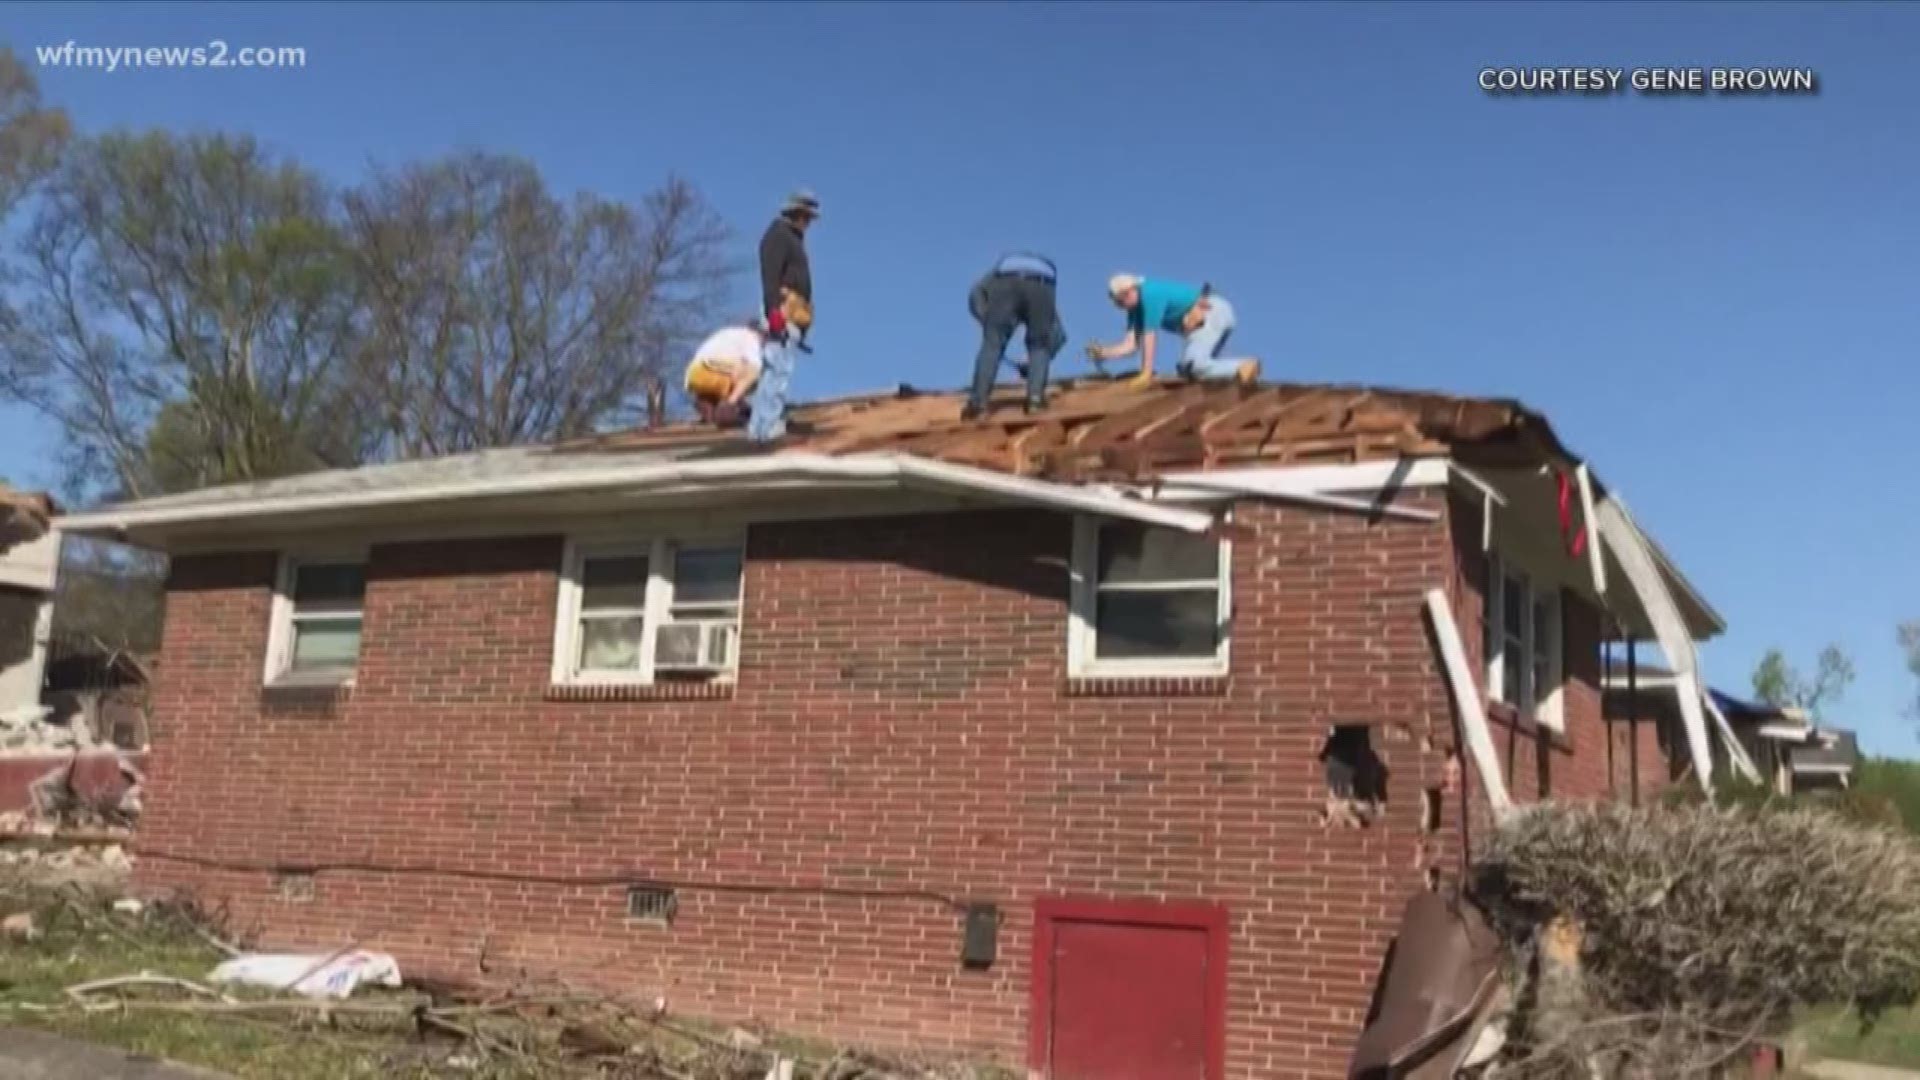 One non-profit has been working with the City of Greensboro to help rebuild homes damaged in the tornado.  Those who endured the storm and wait for repairs are grateful to be back home.